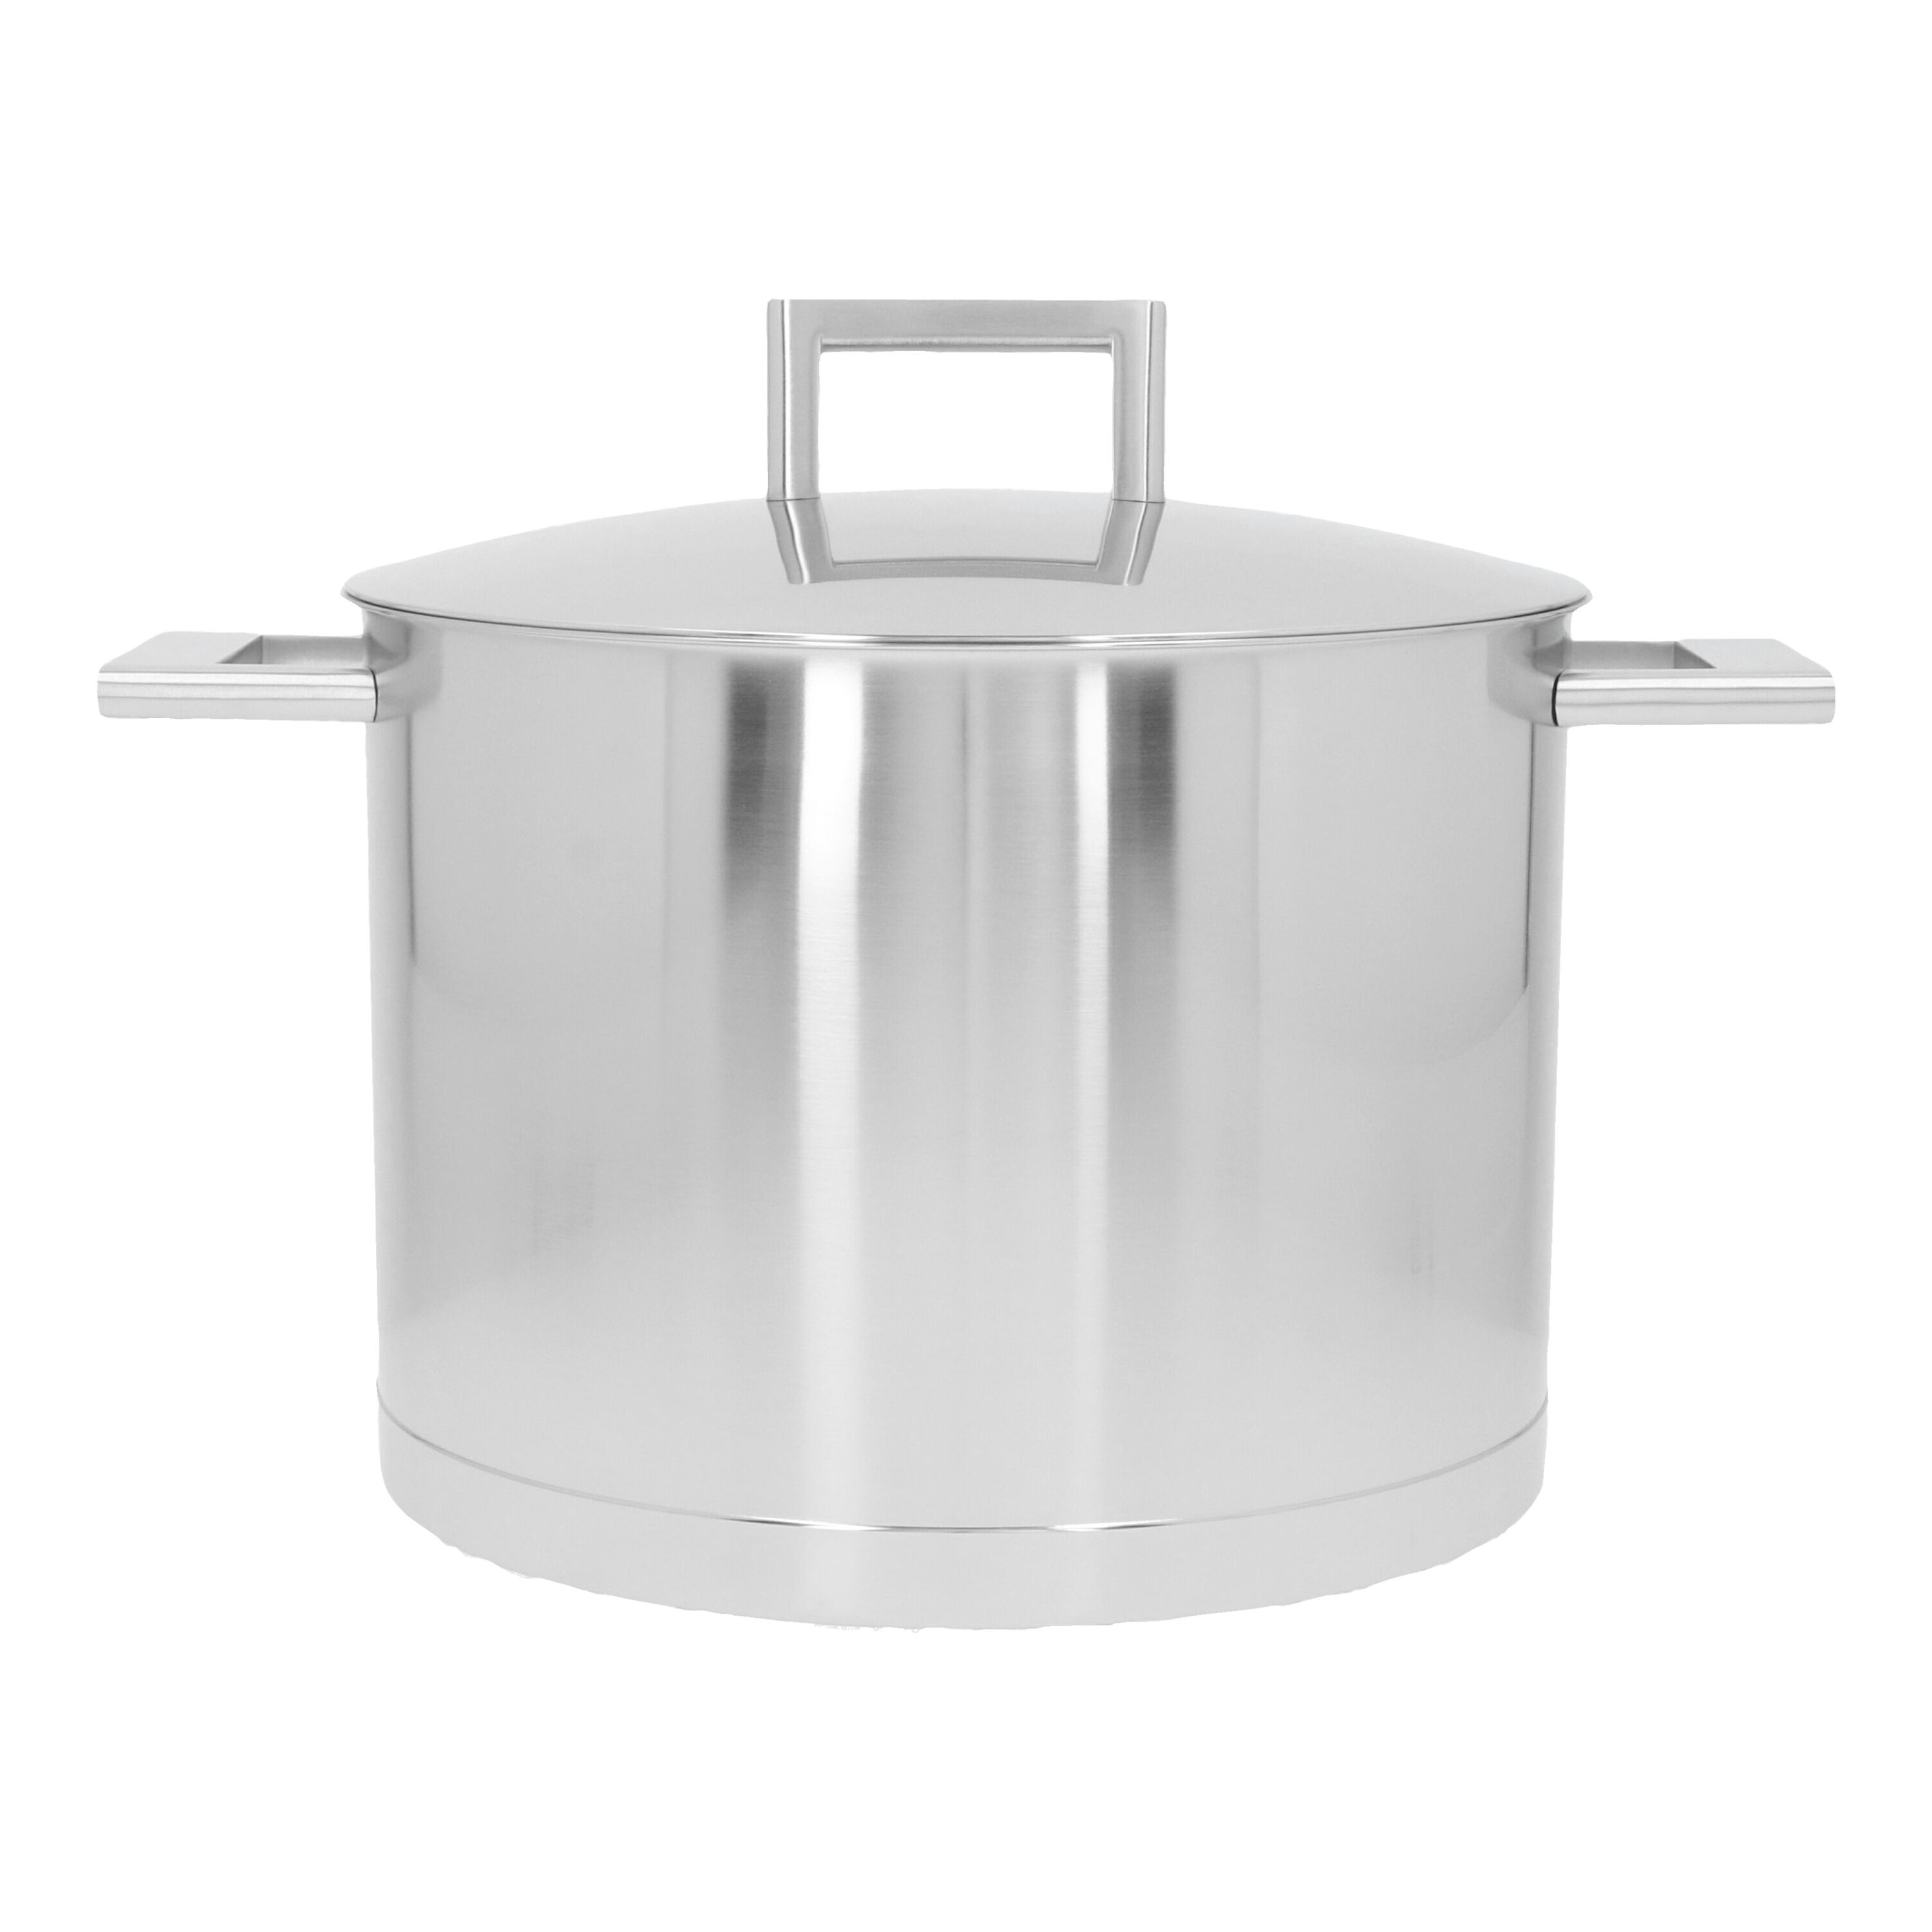 Demeyere Industry 5-Ply 8-qt Stainless Steel Stock Pot, 8-qt - King Soopers